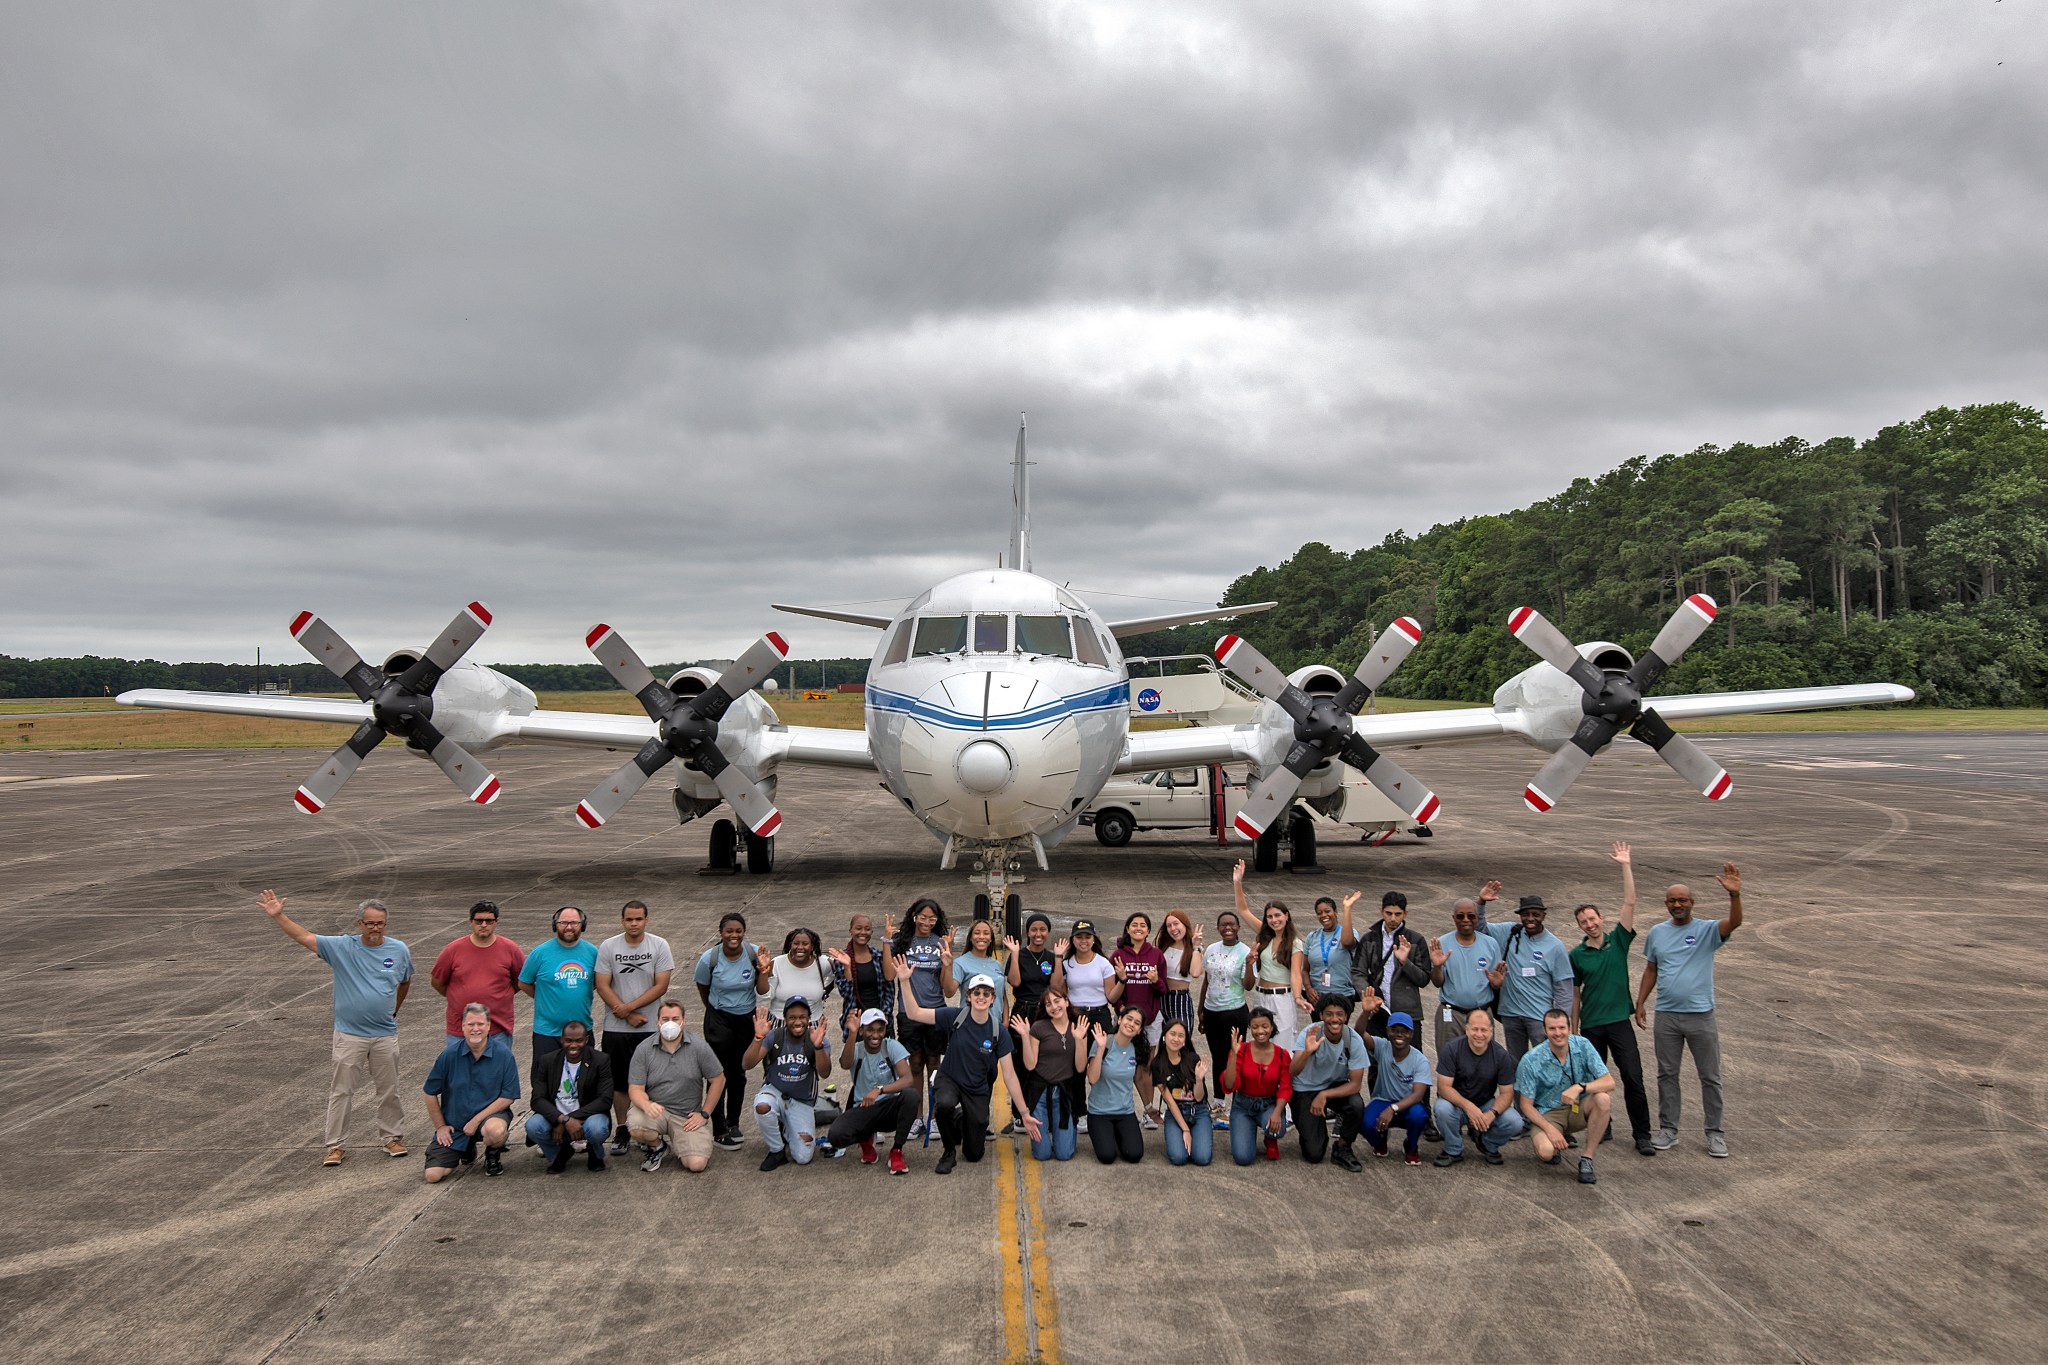 A group of people pose in front of an aircraft facing forwards with four propellers along its wings